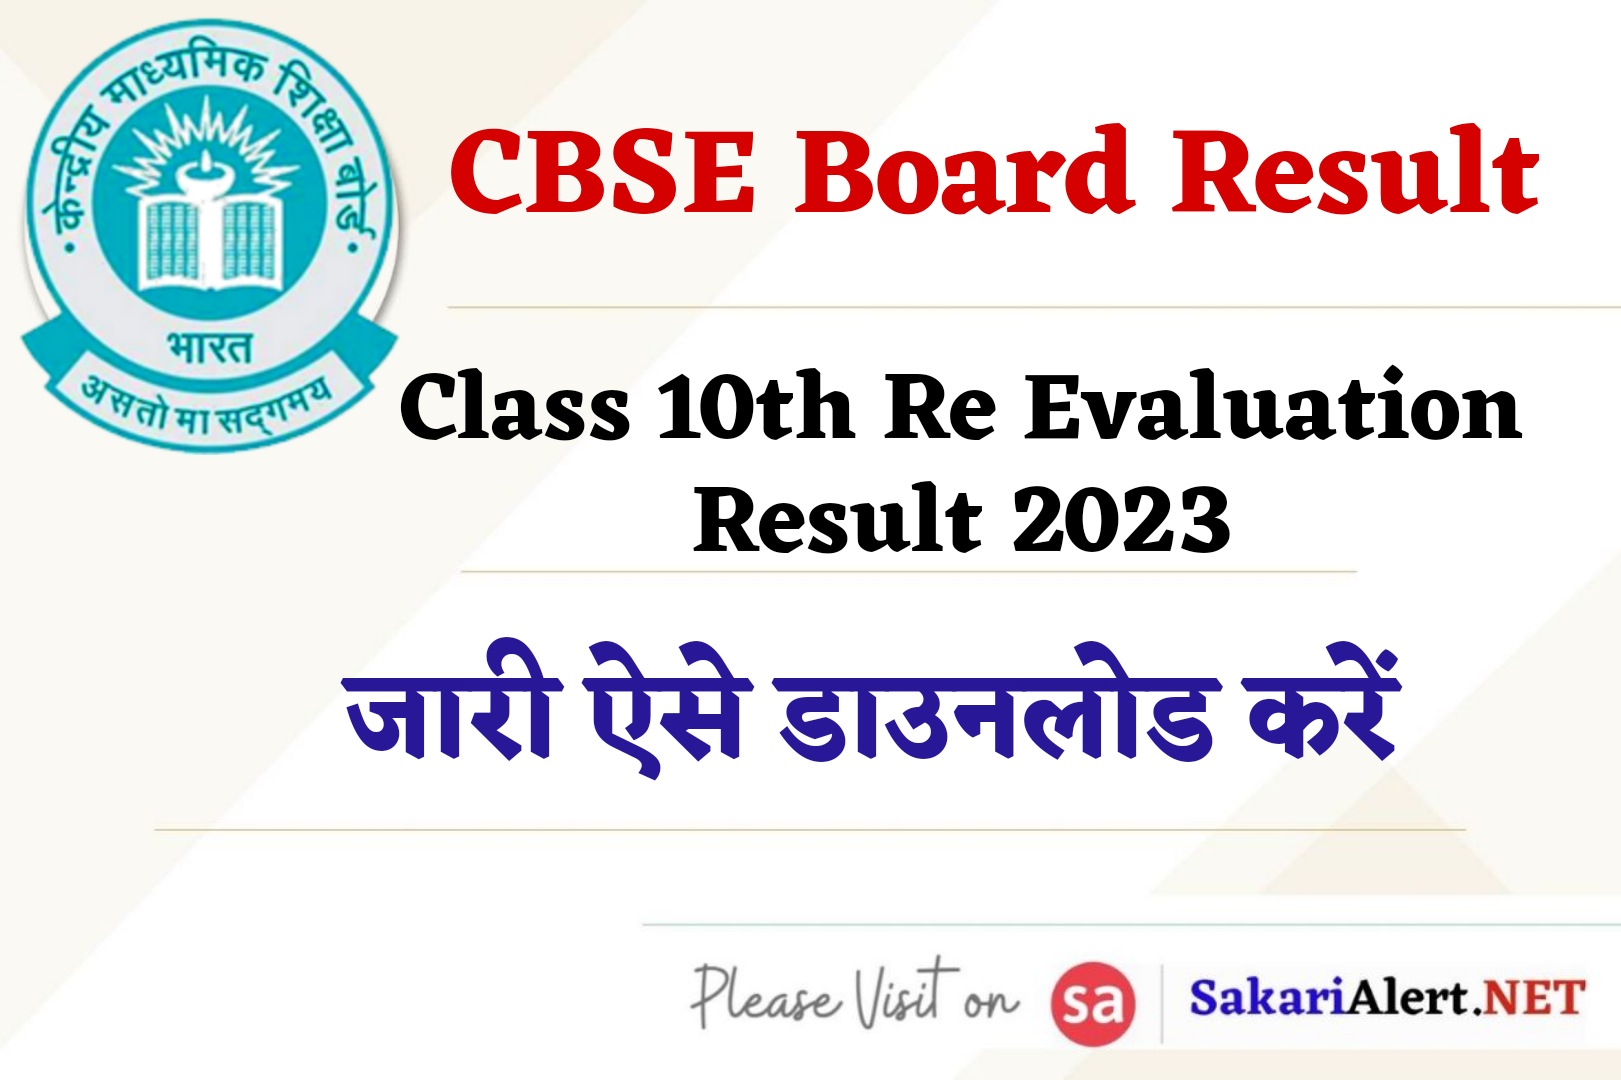 CBSE Board Class 10th Re Evaluation Result 2023